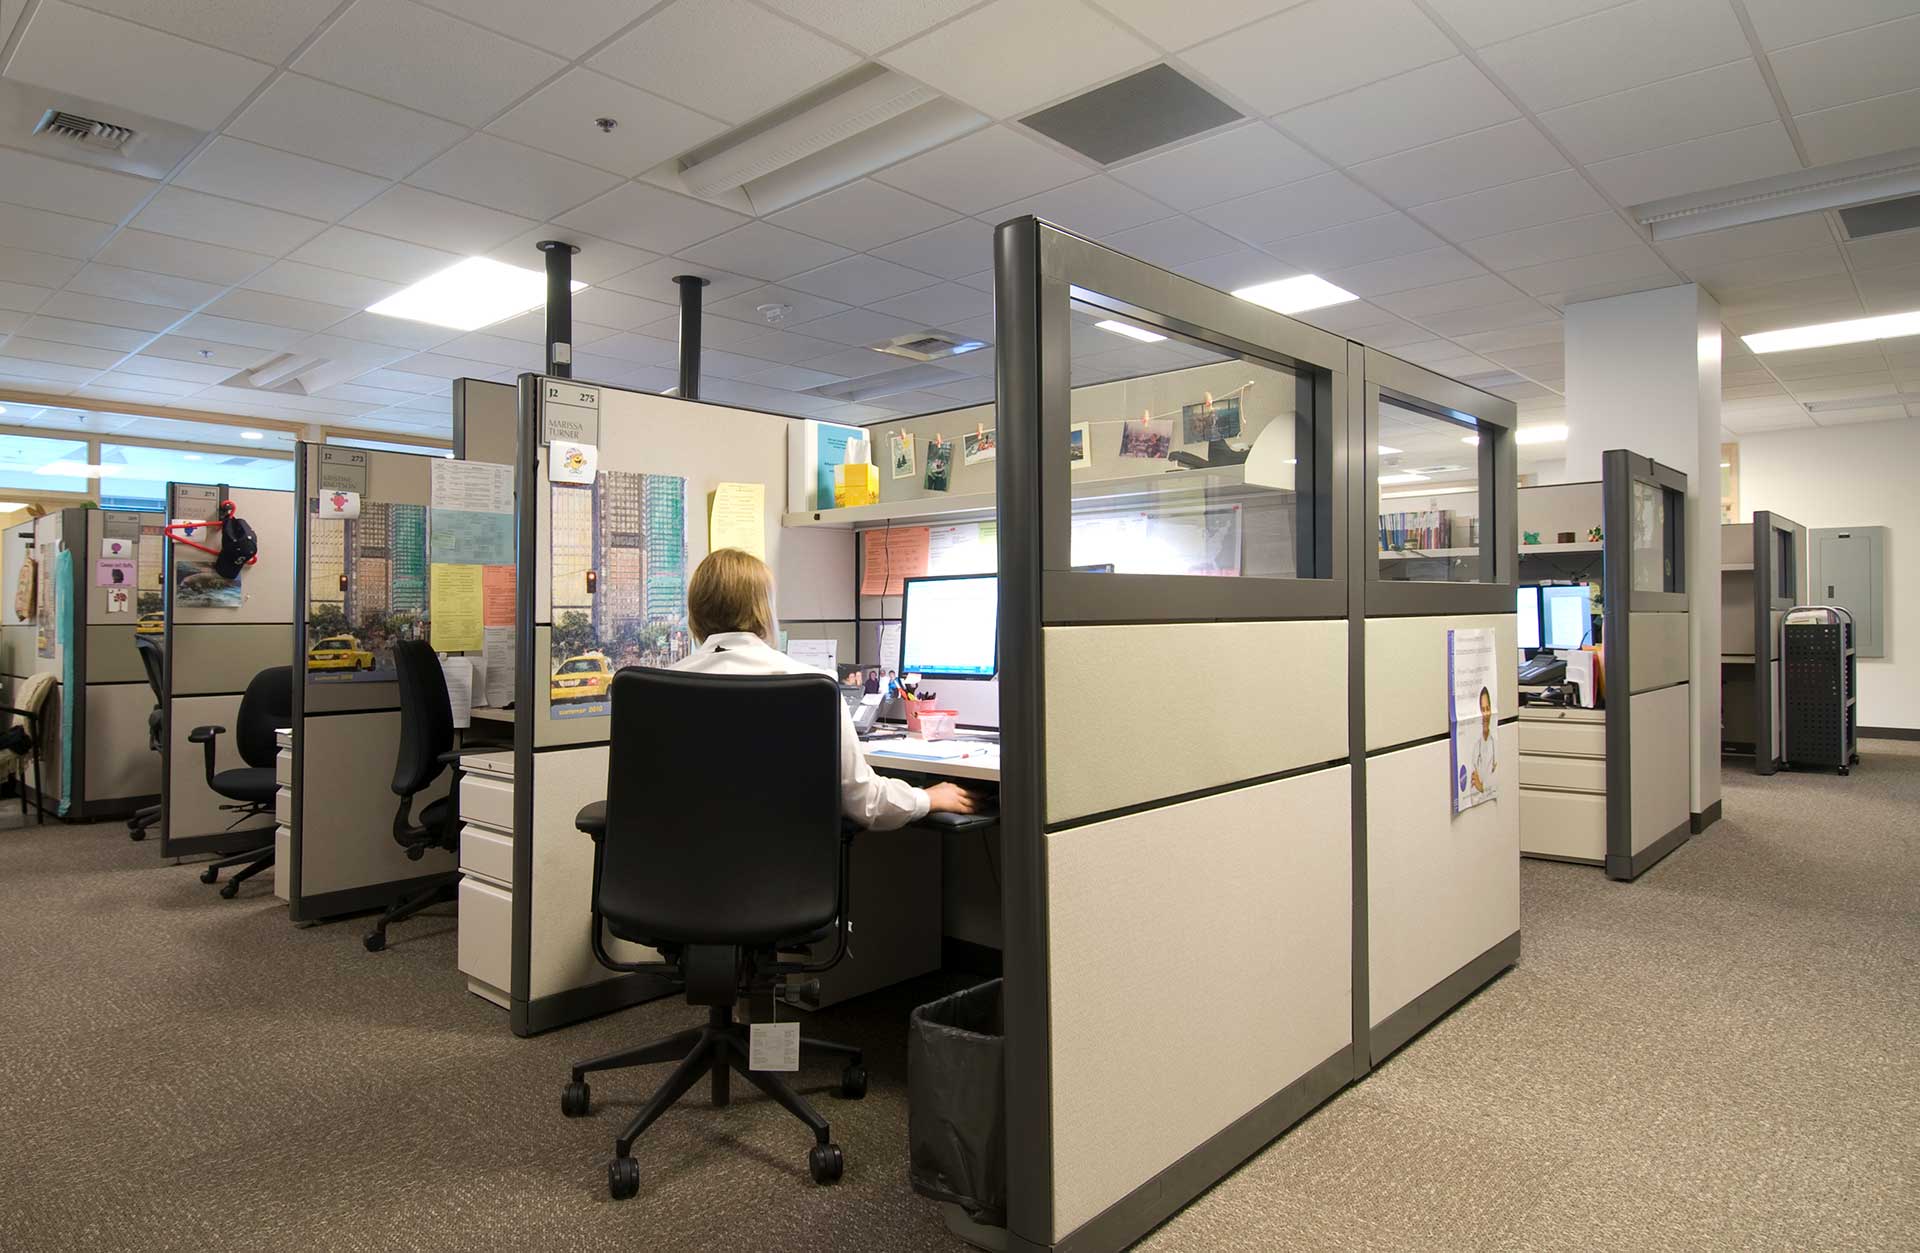 Fred hutch office cubicles with employee at desk